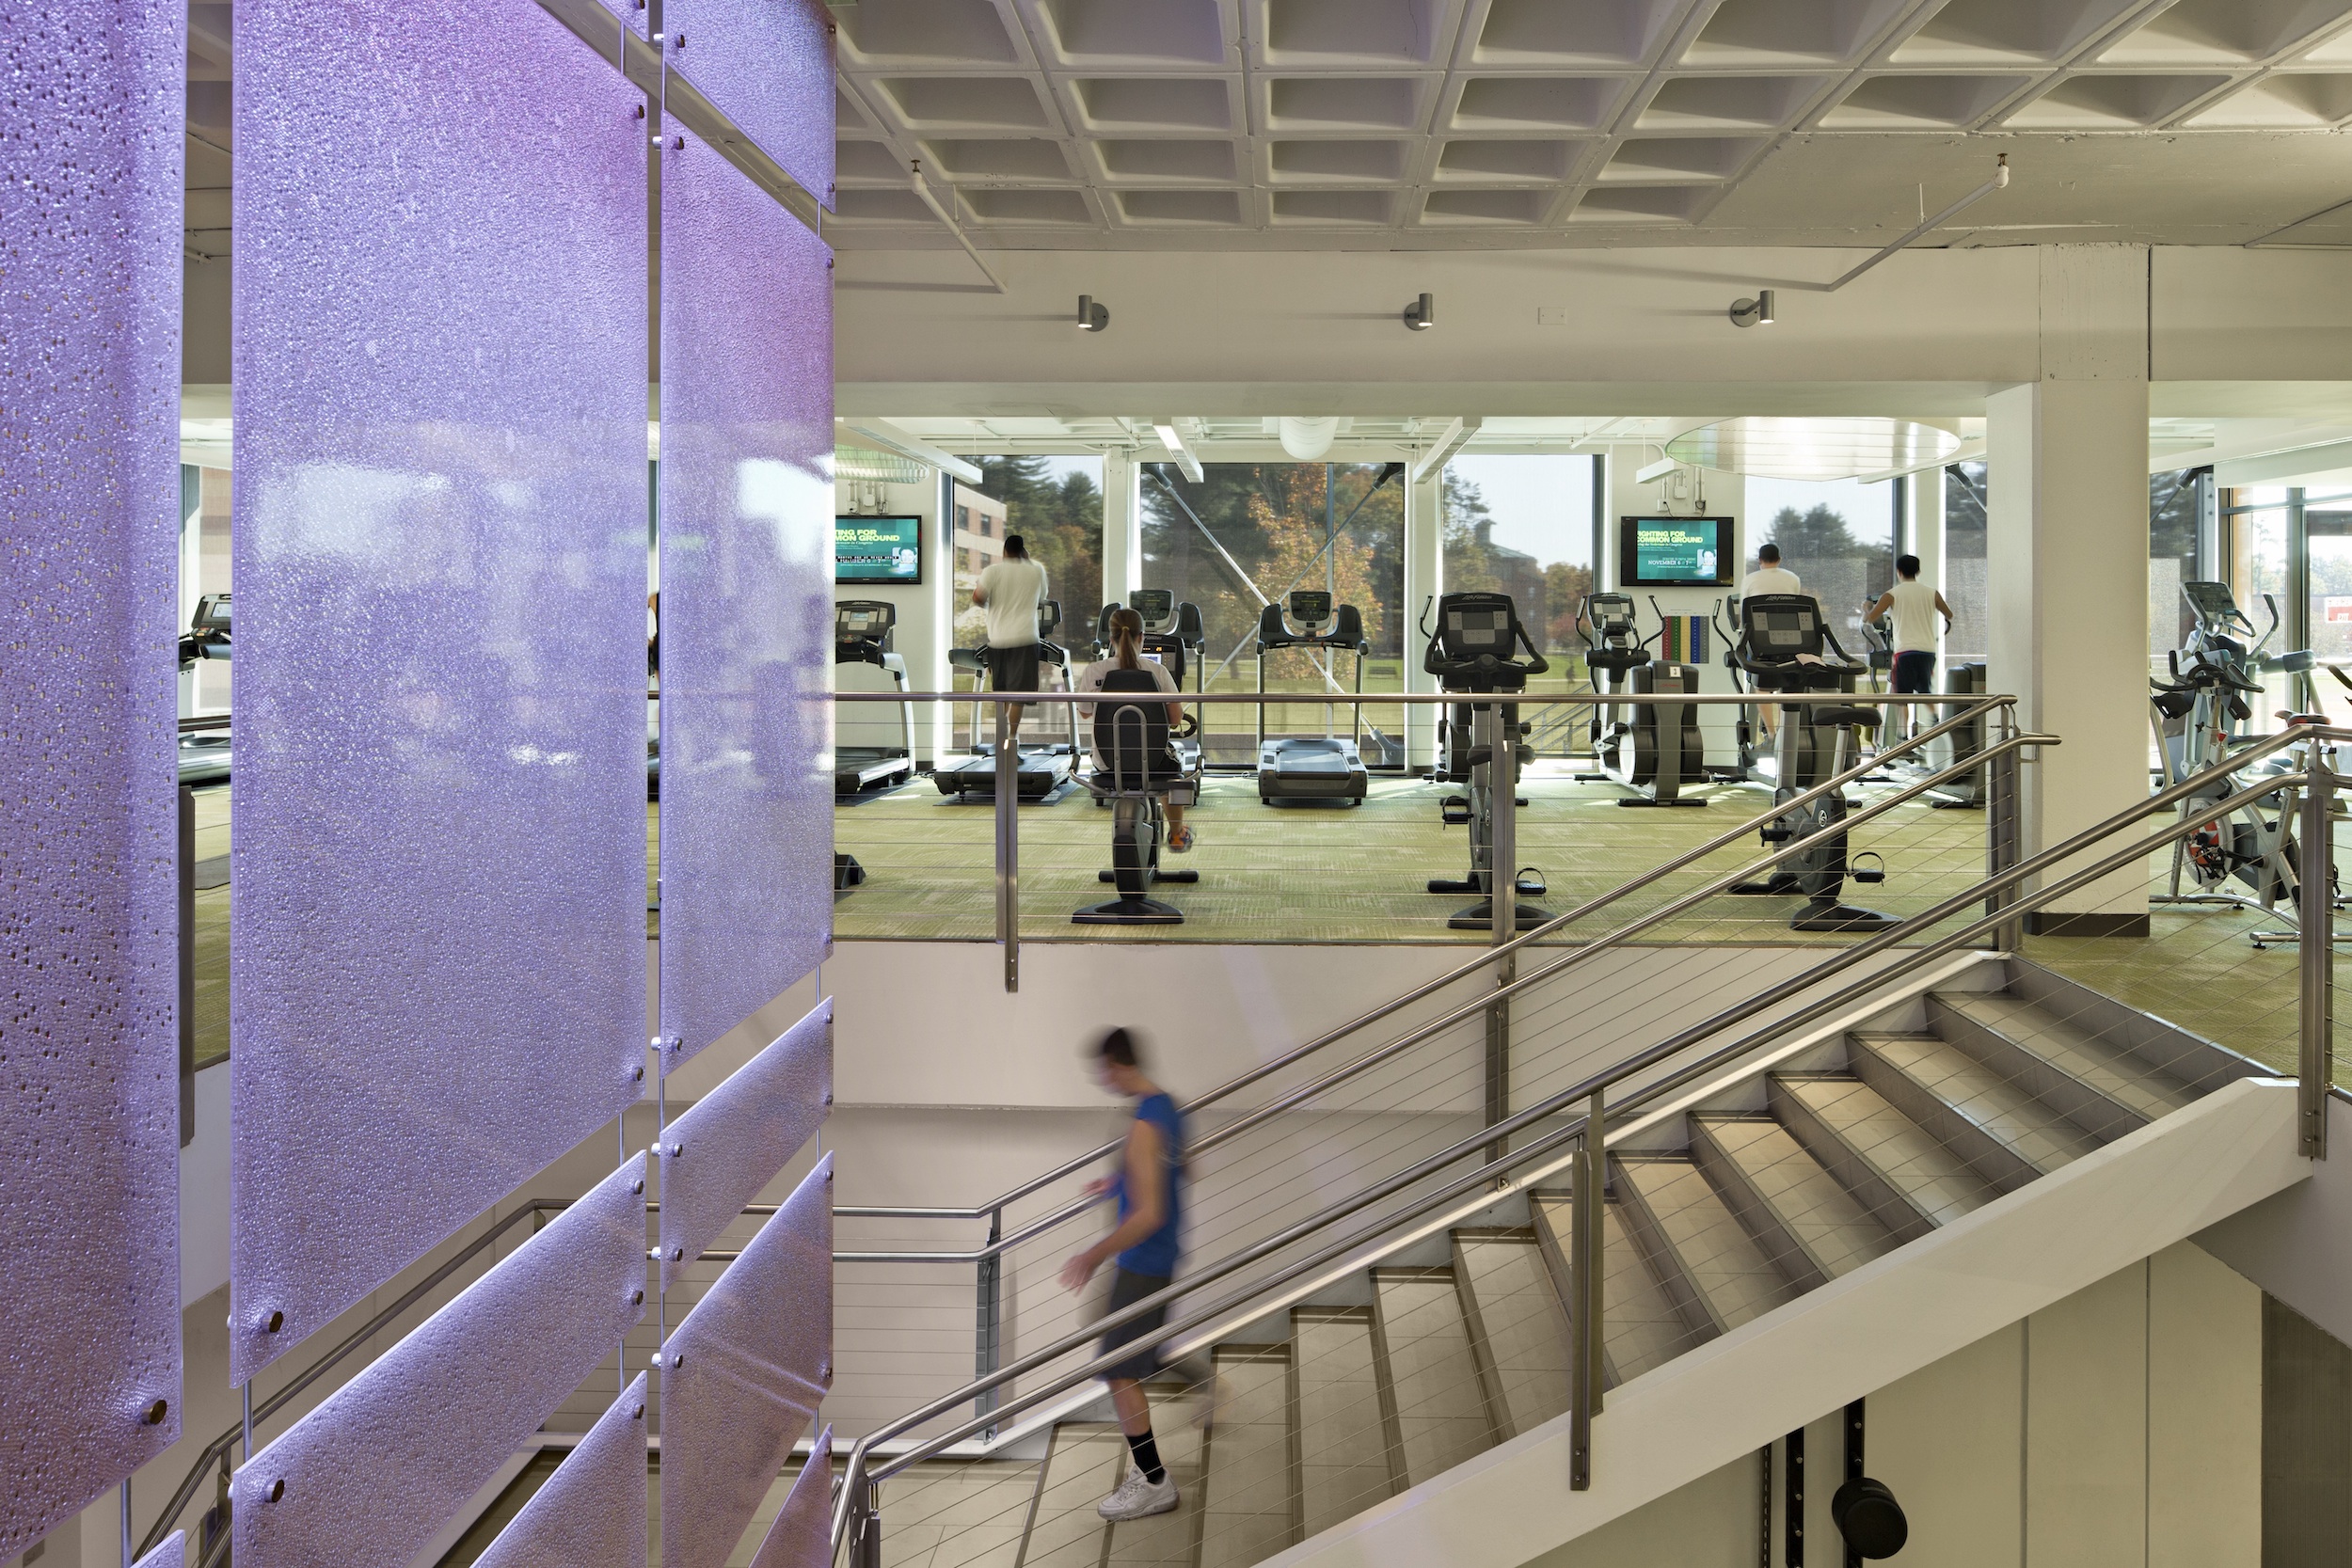 Ely Campus Center's renovation included the expansion of the fitness area into a new two-story wellness center.